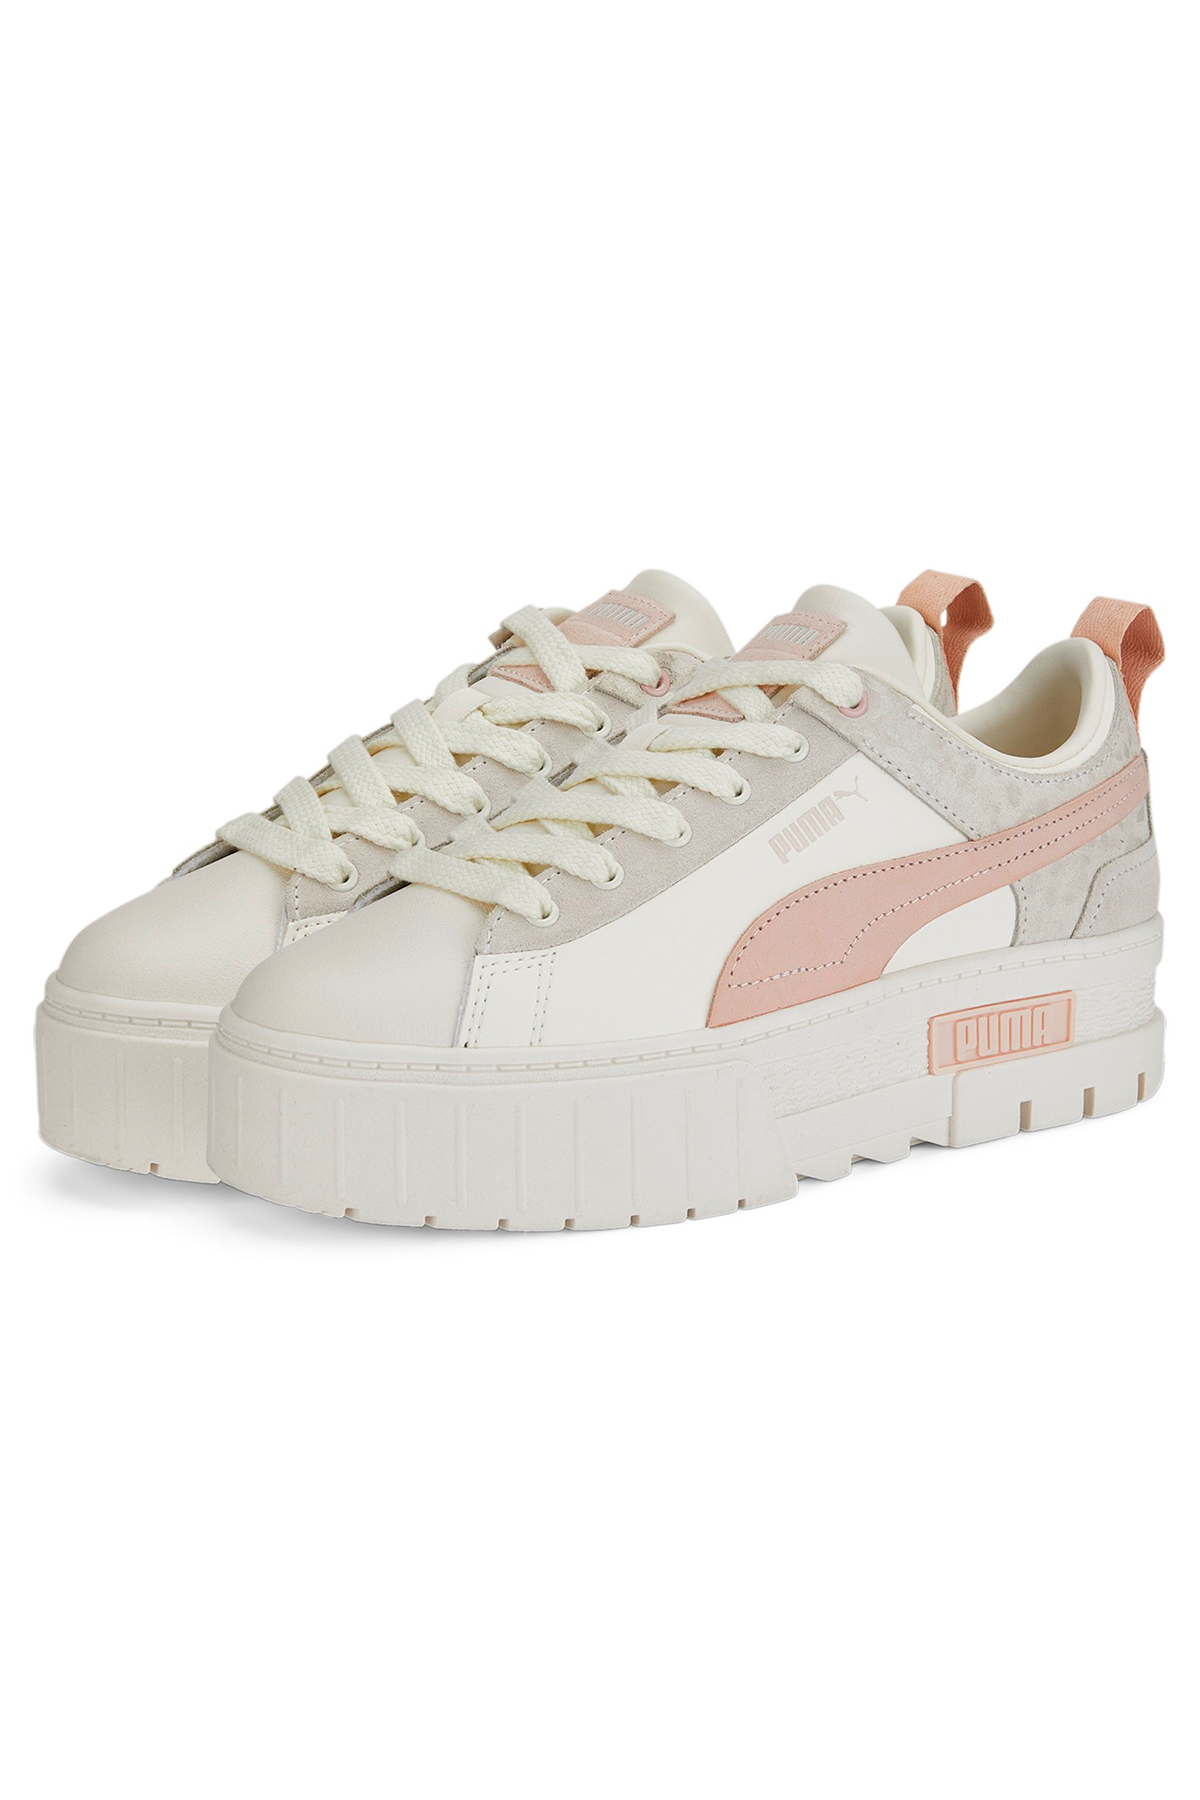 Puma Mayze Raw Muted Animal Sneakers, Farve: Marshmallow, Størrelse: 37, Dame